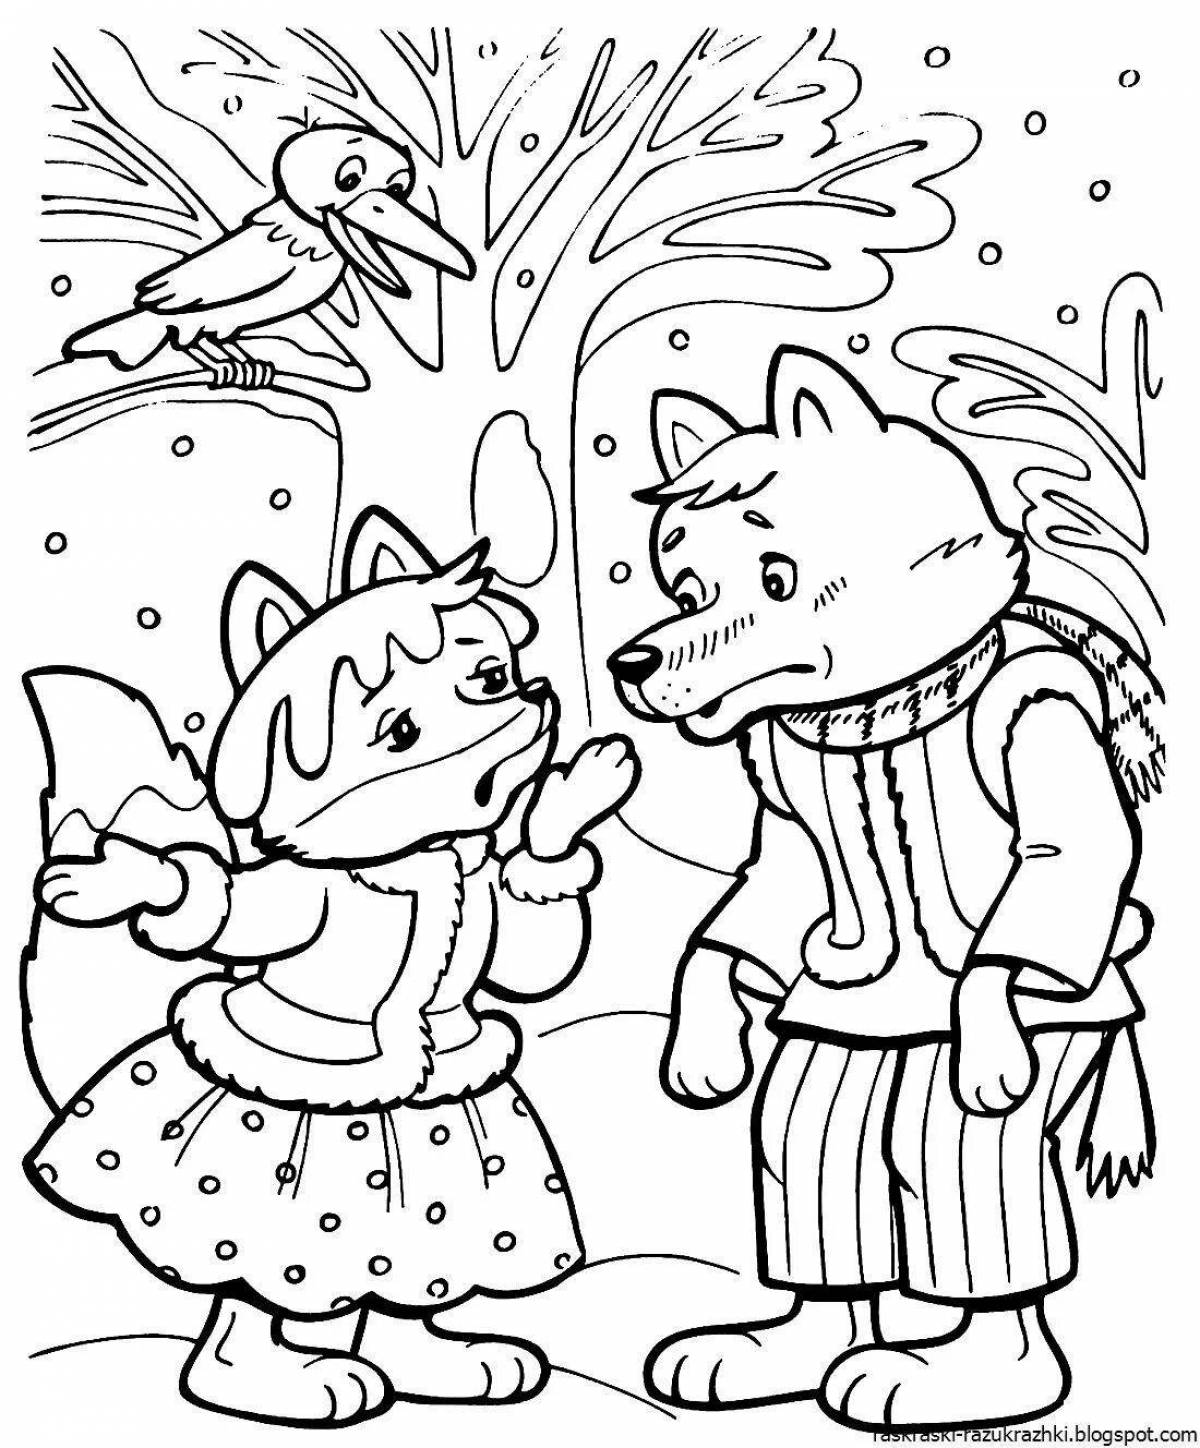 Coloring page magical winter animal hut